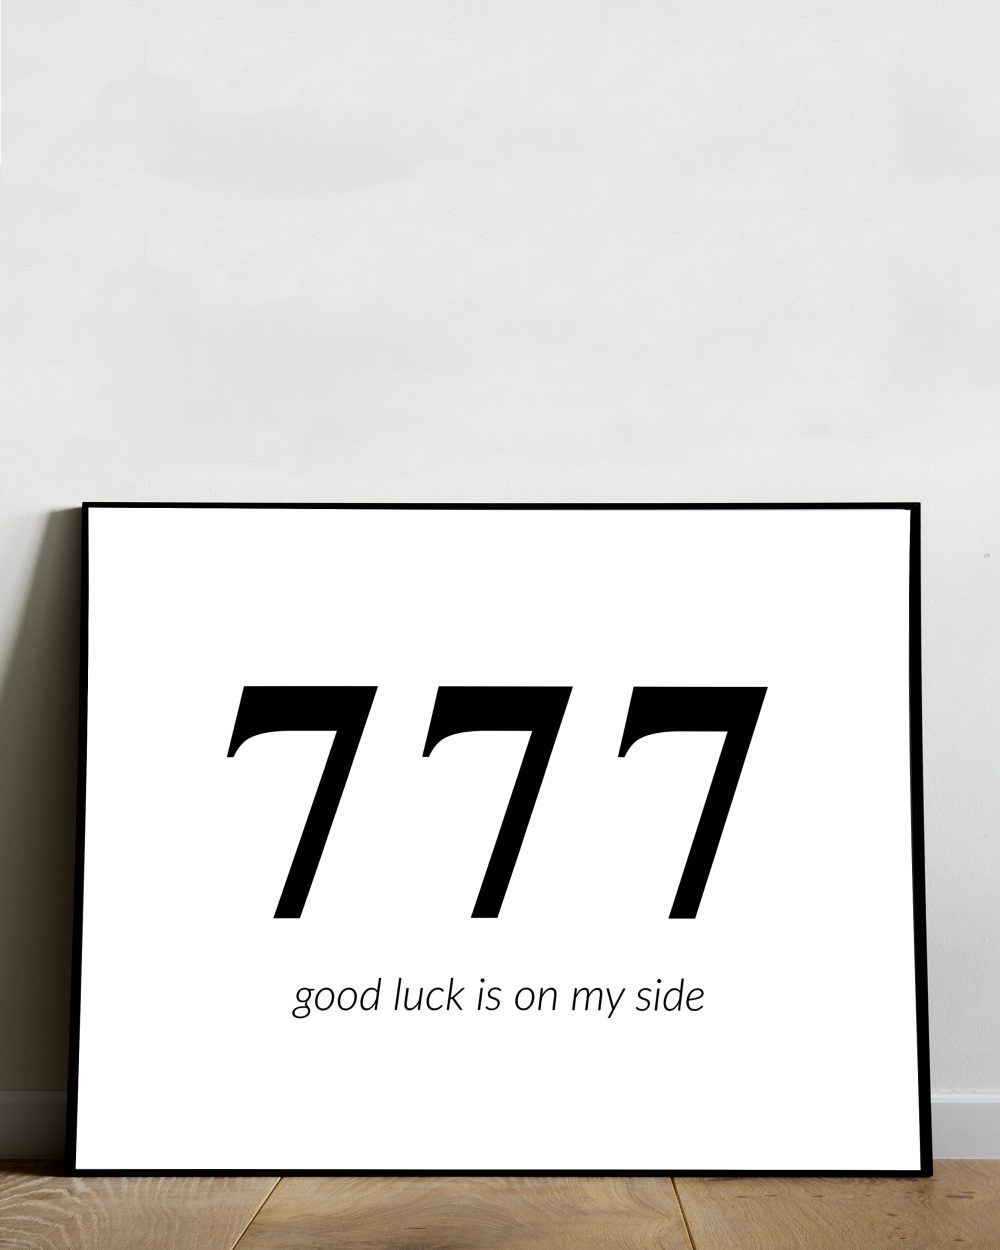 777 angel number quotes